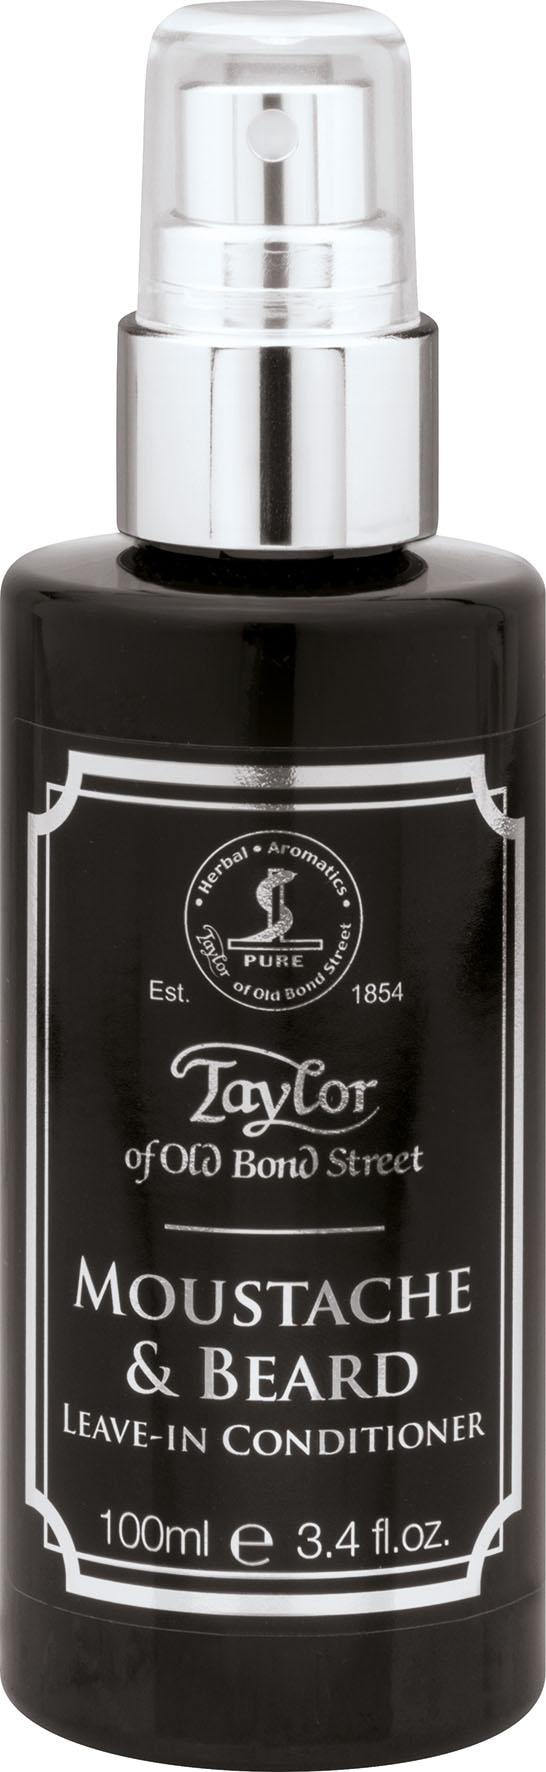 Taylor of Old bei Street online Bond OTTO & kaufen Beard Leave-In Bartconditioner Conditioner« »Moustache